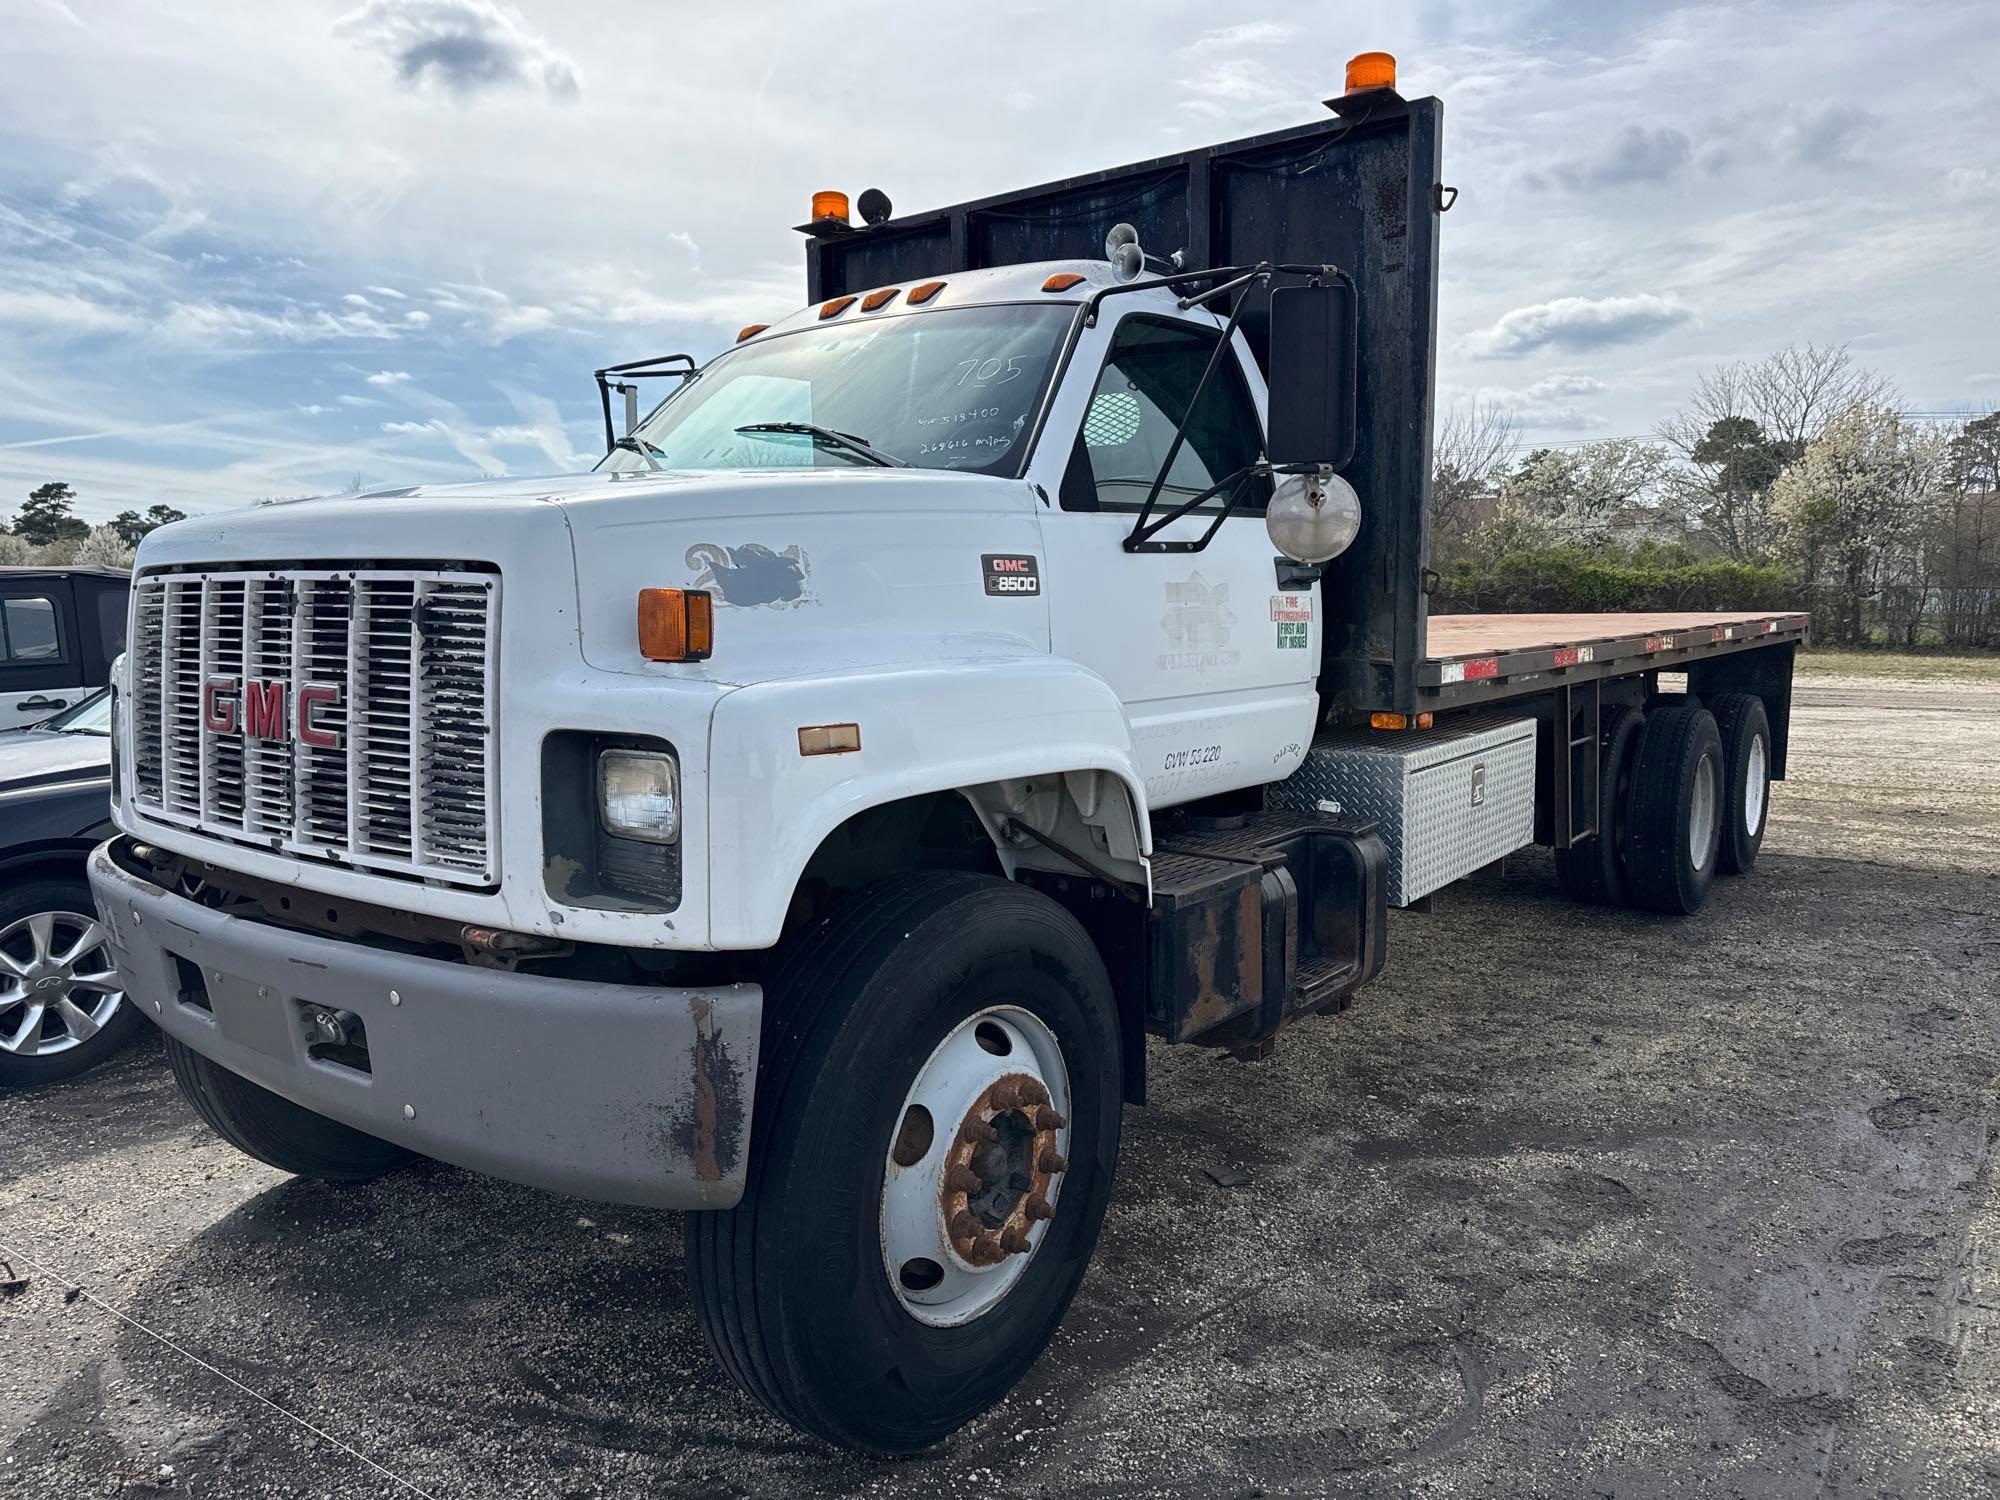 1998 GMC FLATBED TRUCK VN:1GDT7H4C4WJ518400 powered by diesel engine, equipped with 22ft. Flatbed